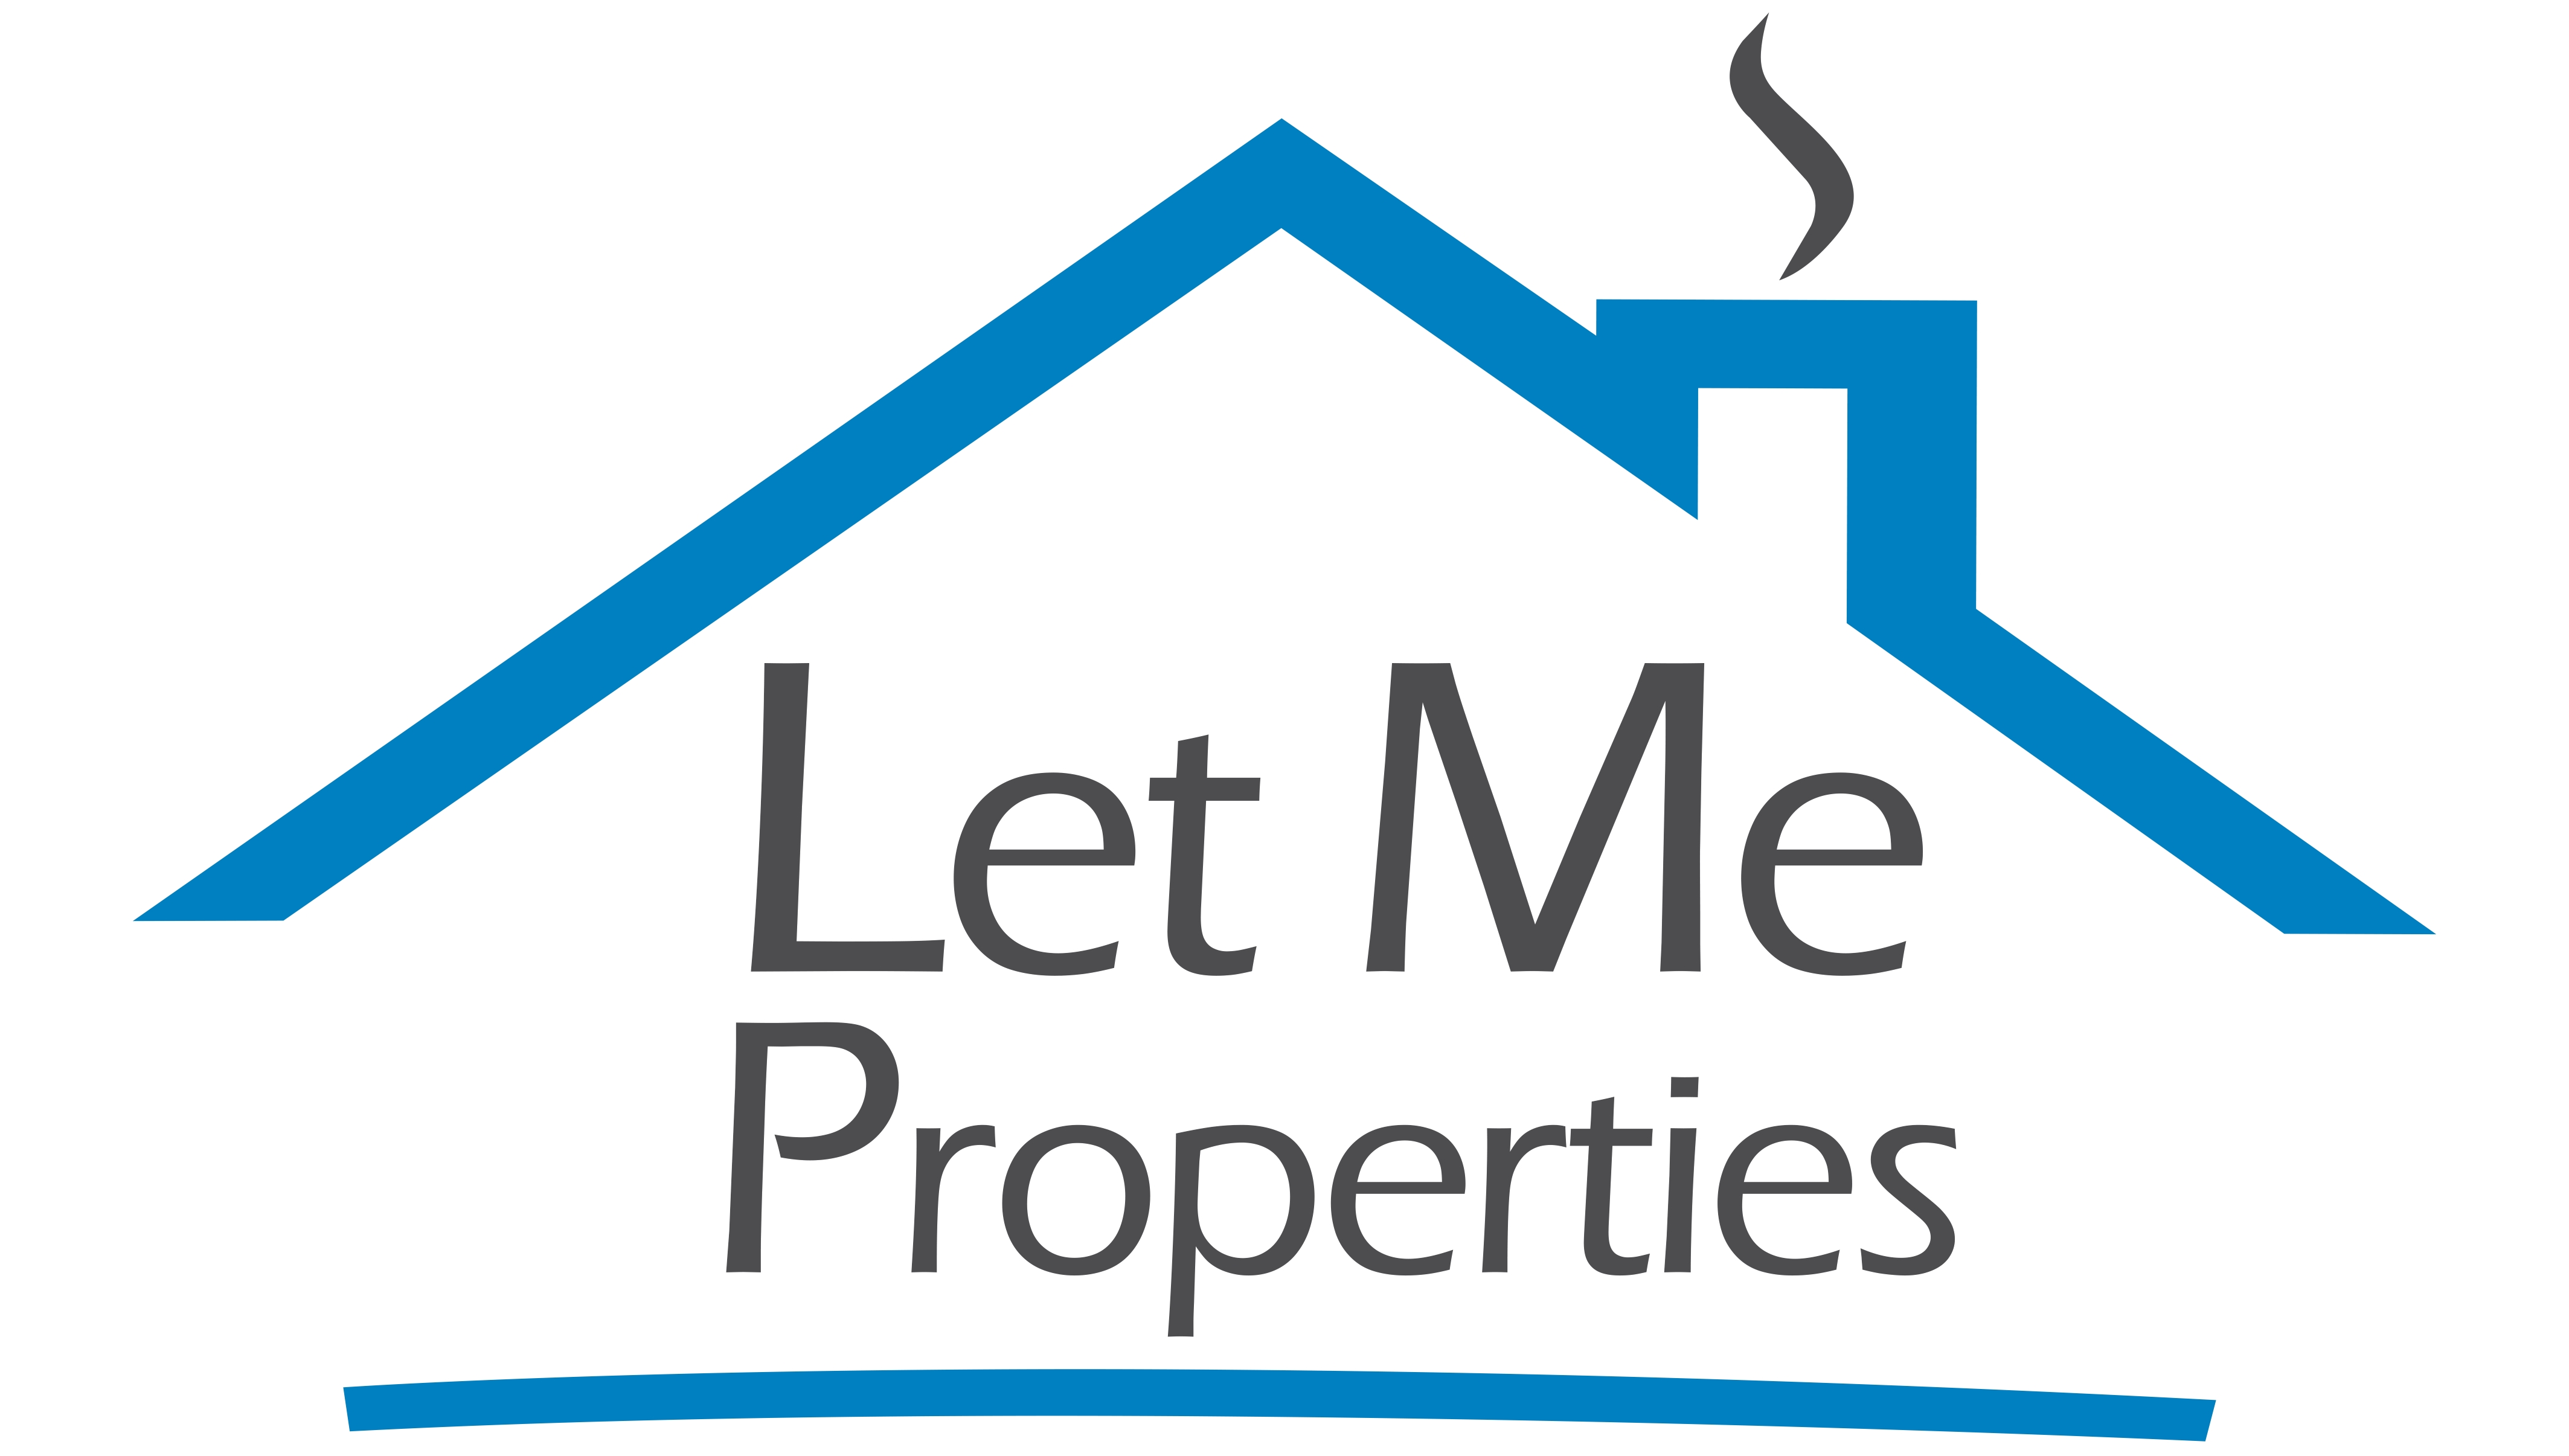 Let Me Properties : Letting agents in St Albans Hertfordshire